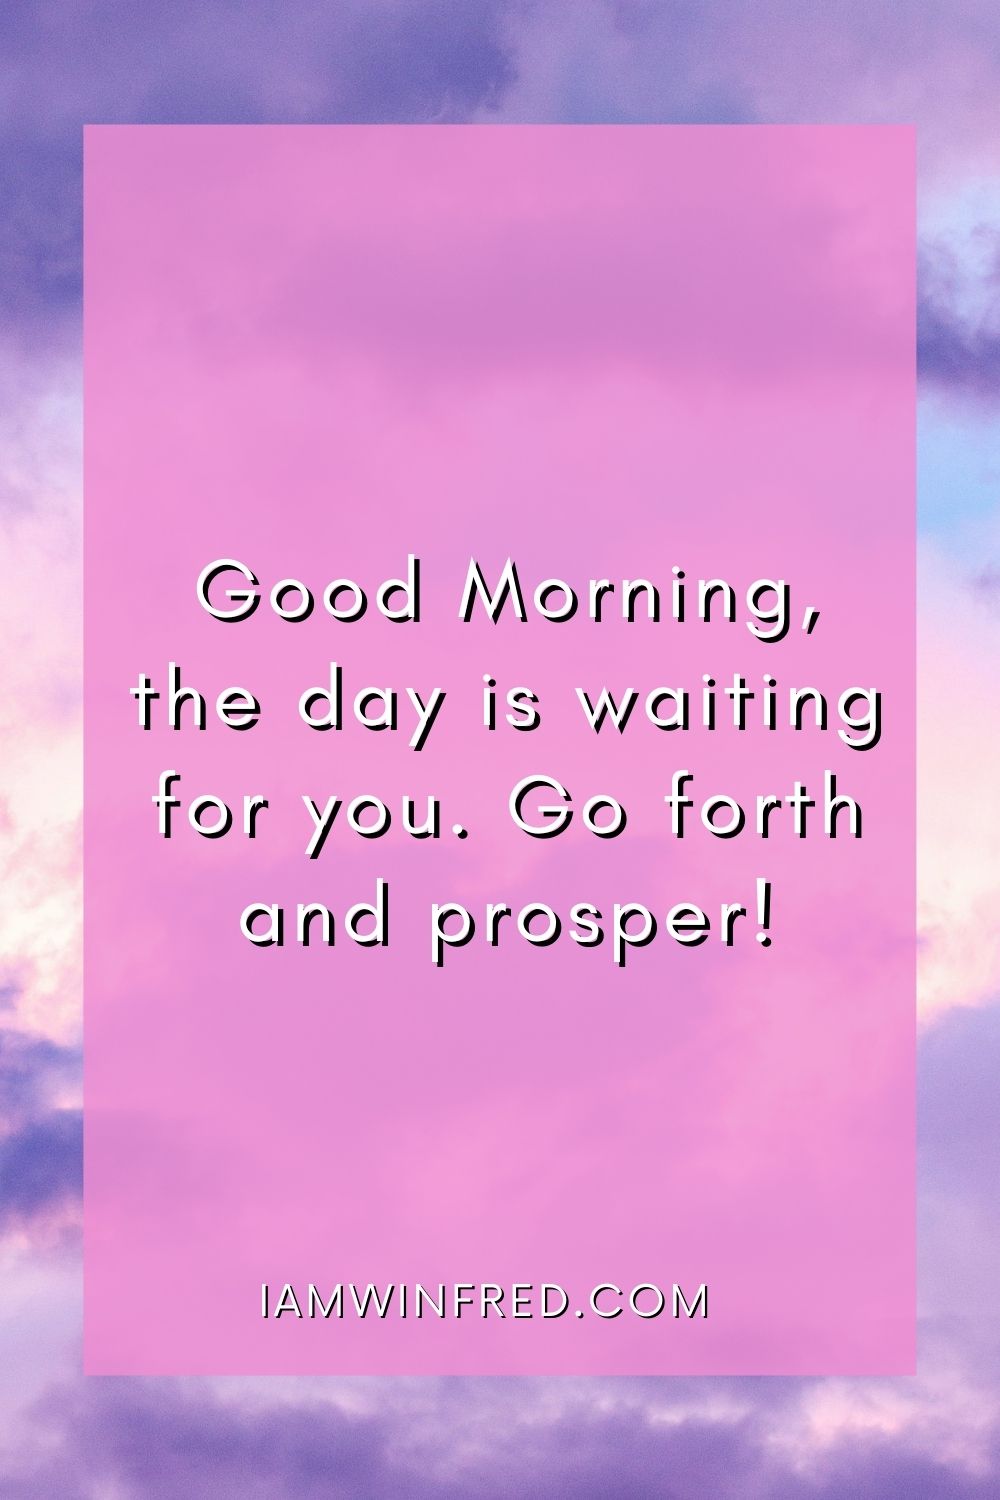 Good Morning The Day Is Waiting For You. Go Forth And Prosper